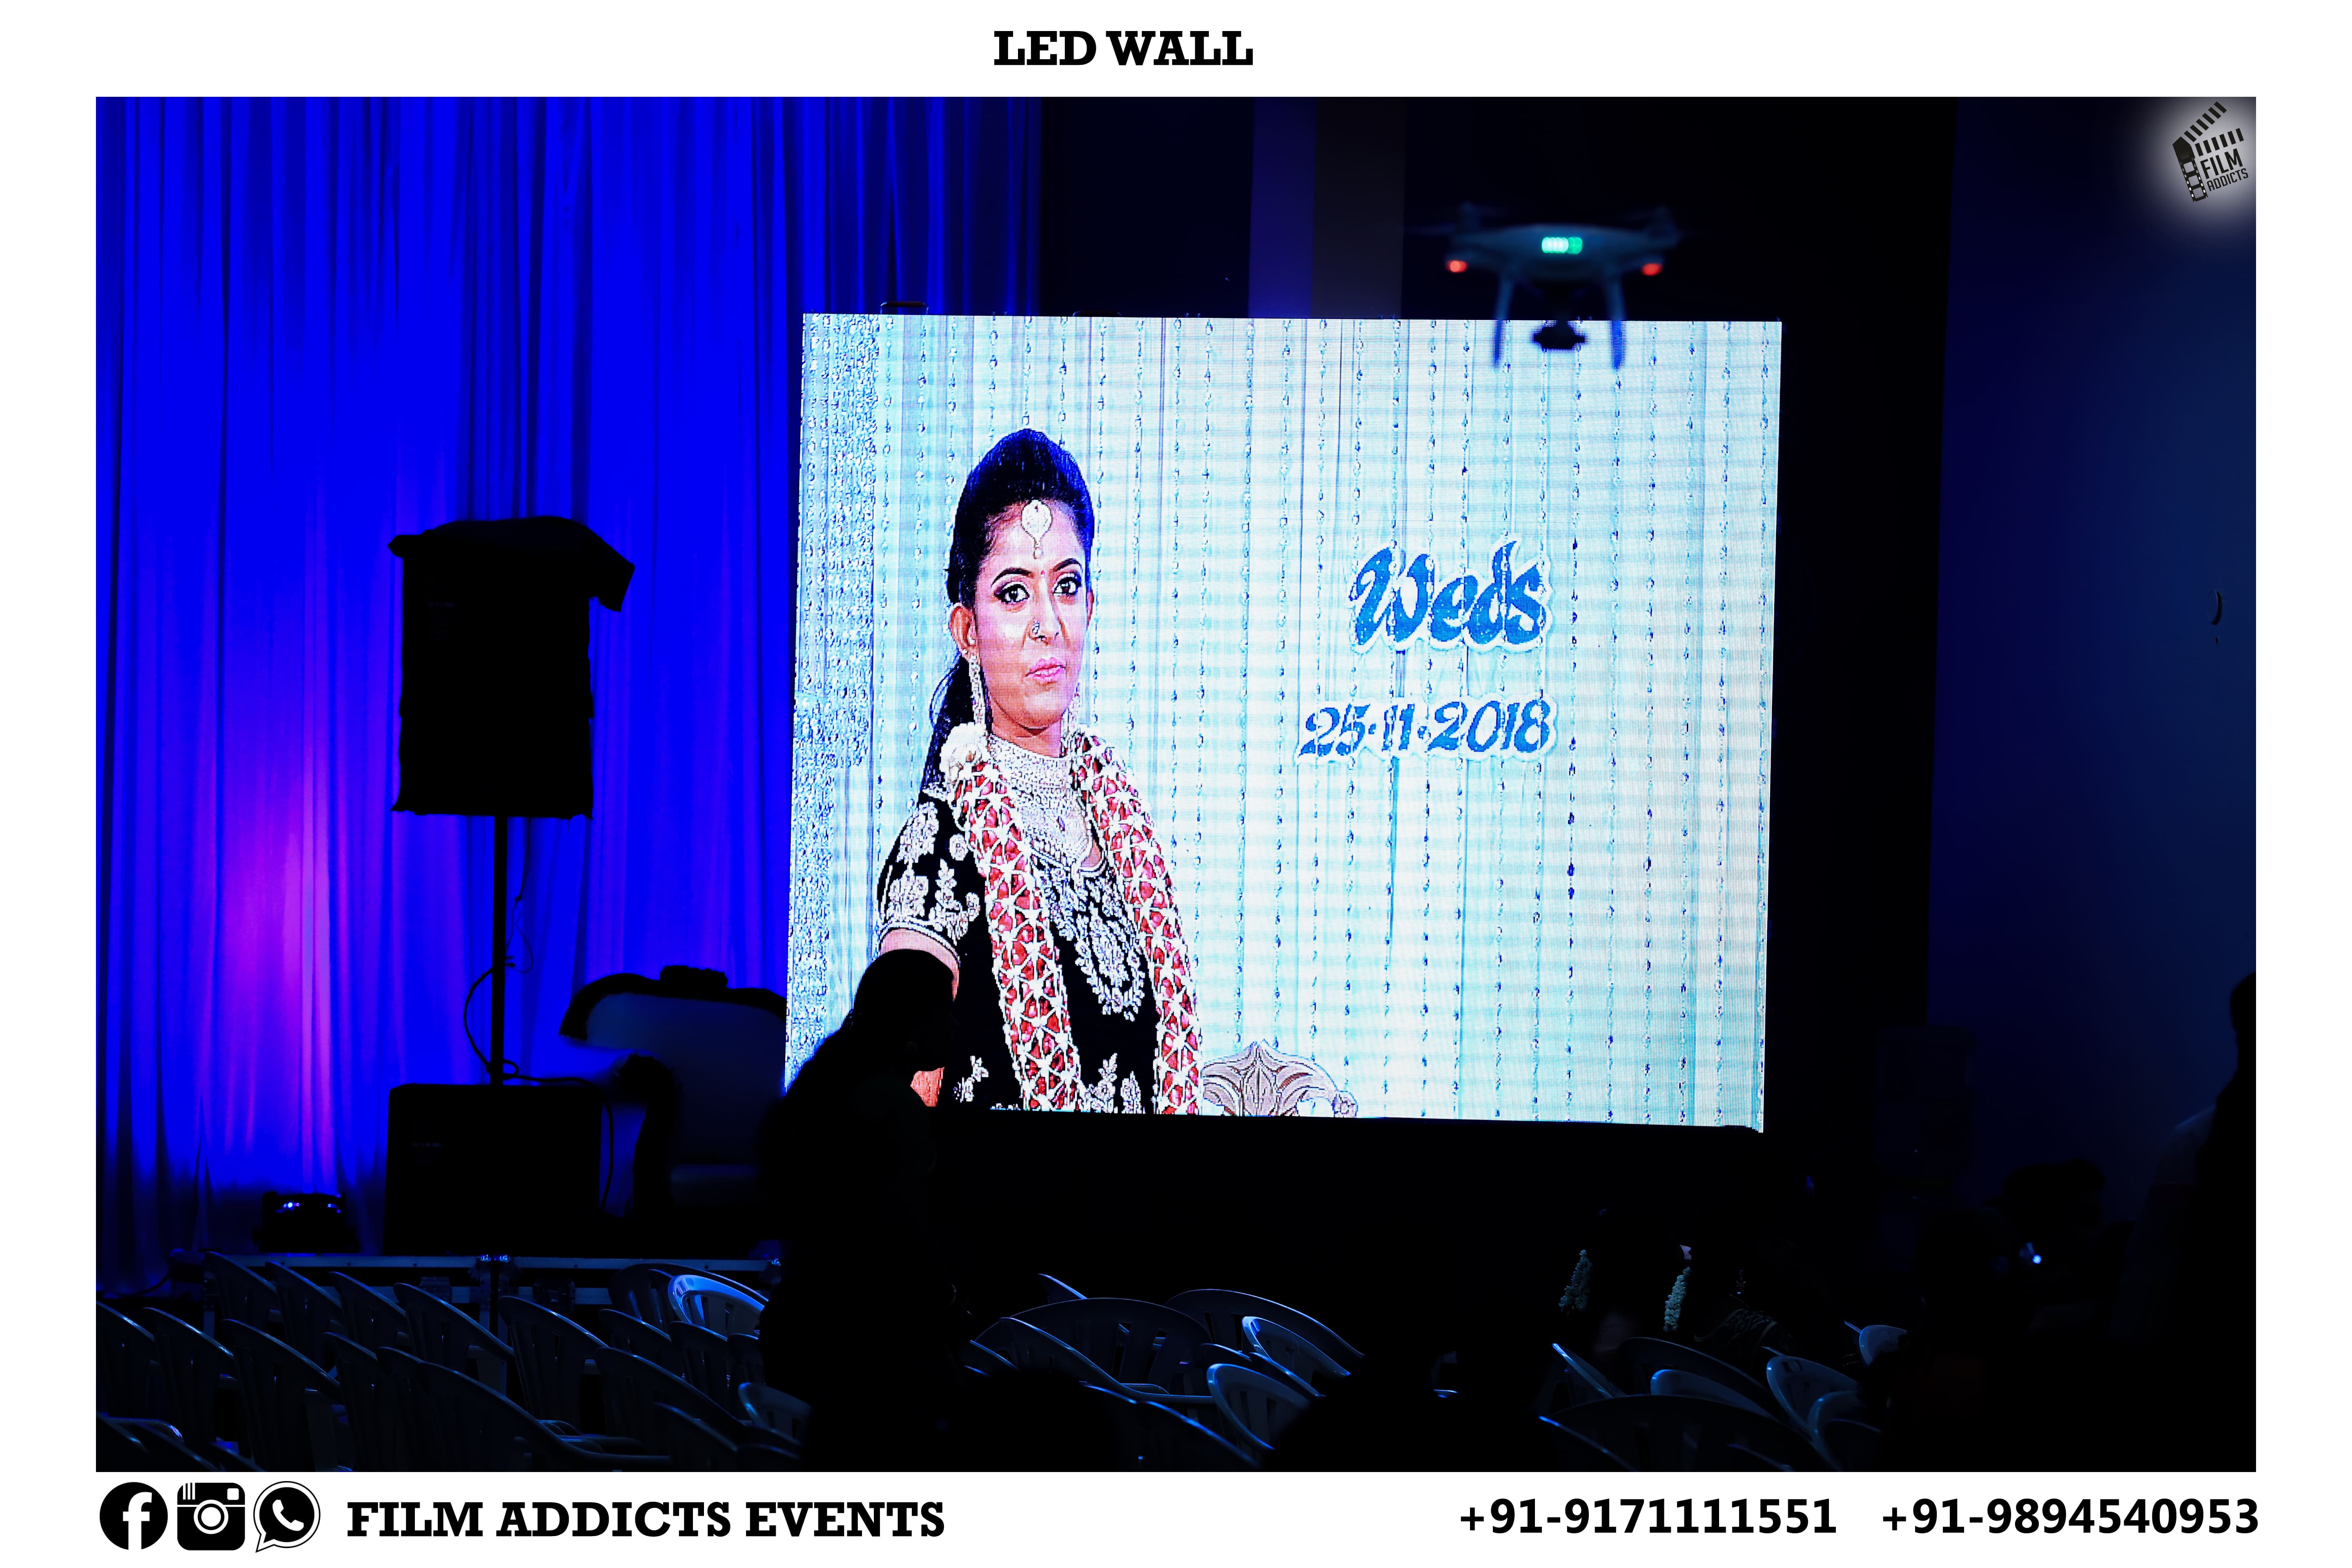 Best LED Video Wall Services in Dindigul, Best LED Wall Services In Dindigul ,Best LED Wall Rental Services In Dindigul, Best Budget LED Wall Rental  Services in Dindigul, Best Wedding LED Wall Rentals In Dindigul, Best clarity in led wall rentals in Dindigul, Best cost-effective display rentals in Dindigul, Best crisp, bright, high resolution led video services in Dindigul, Best led wall rental services in Dindigul, Best tailored lighting, vision and sound solutions led rentals in Dindigul, Best outstanding new LED panels rental Service in Dindigul, Best Indoor and Outdoor LED panels rental Service in Dindigul, Best high resolution LED display rental Service in Dindigul, Best Wedding LED wall rentals in Dindigul, Best Grand wedding LED wall rentals in Dindigul, Best LED wall rental Service in Dindigul, Best LED Video Services in Dindigul, Best Grand Wedding LED wall Renatls in Dindigul, Best LED wall Rentals for Grand Occasions in Dindigul, Best Wedding LED Video Services in Dindigul, Best Wedding LED video wall Rental Services in Dindigul, Best LED Video Wall Rentals for Grand Occassions in Dindigul, Best LED Video Wall Rentals for events in Dindigul, Best LED video Services for live events in Dindigul, Best video wall rentals for Live events in Dindigul, Best LED Video Wall Rentals for Live events in Dindigul, Best LED Video Wall On Hire in Dindigul, Best LED Video Wall Services in Dindigul, Best LED Video Wall Service Systems in Dindigul, Best LED Wall Washer Light Services in Dindigul, Best LED Wall Light Services in Dindigul, Best LED Wall Mount Bracket Services in Dindigul.